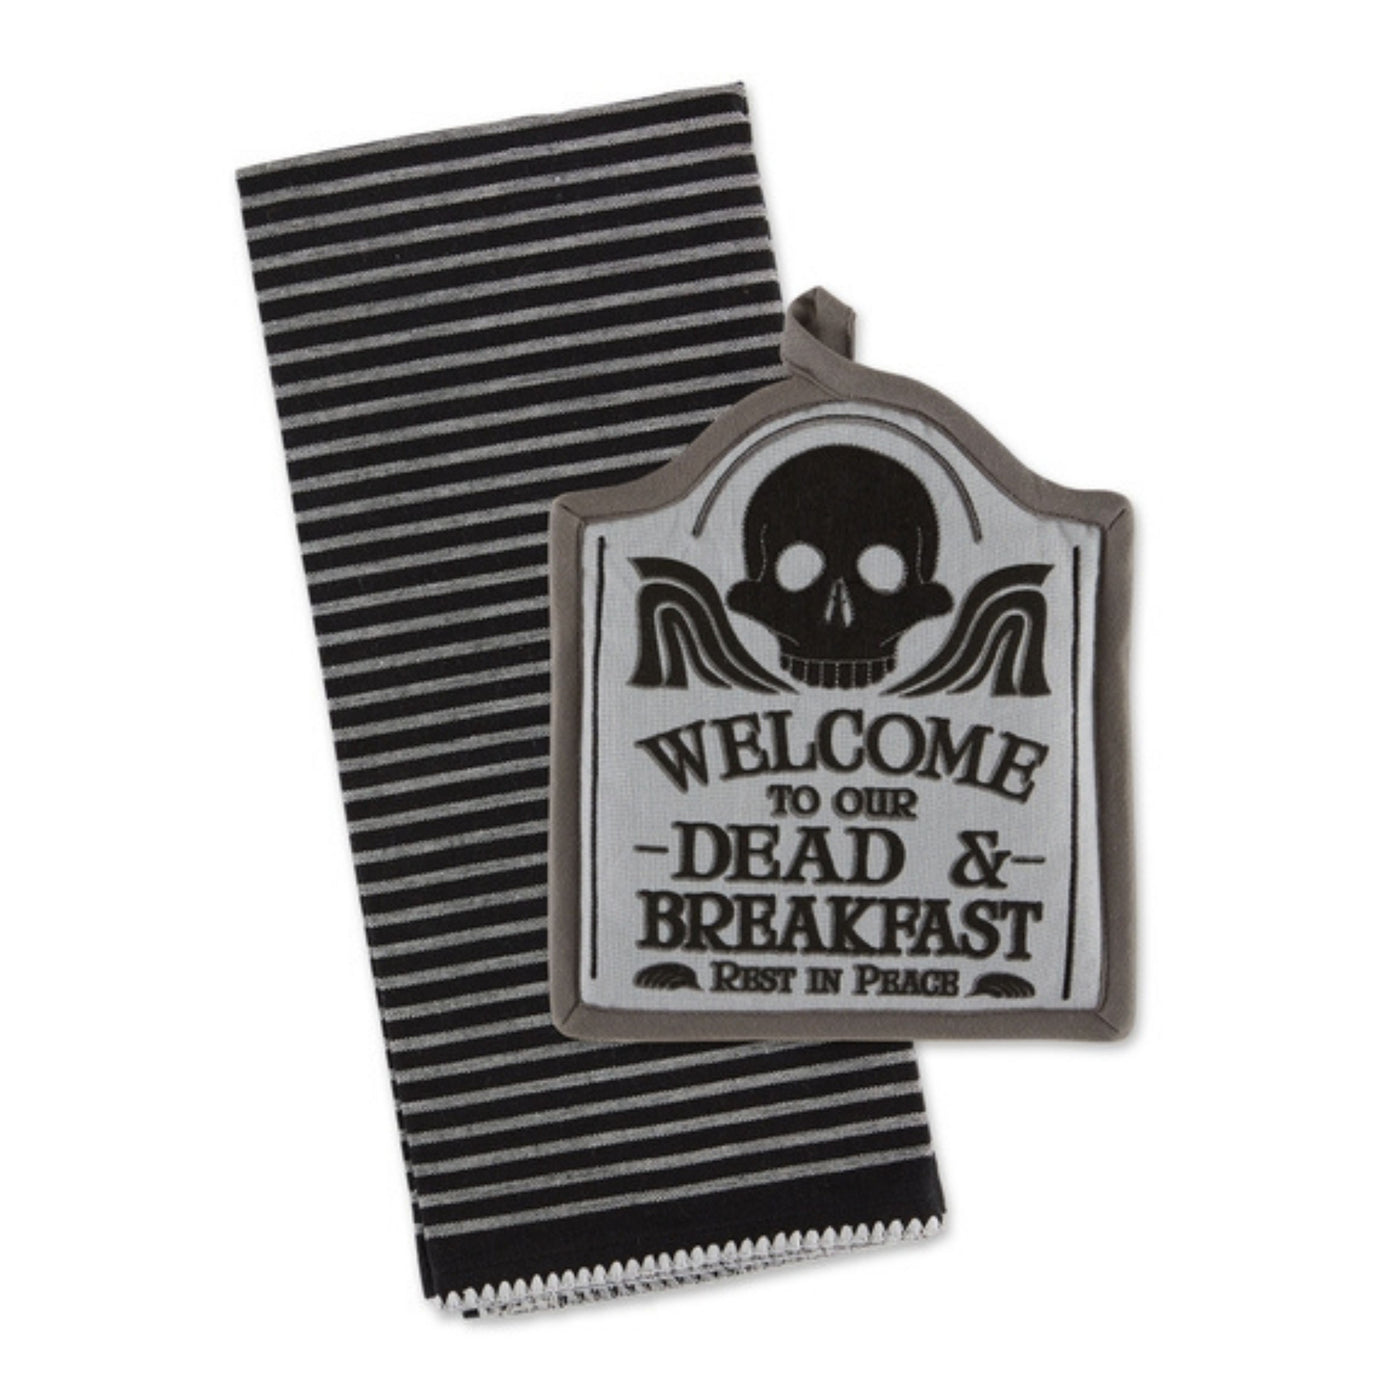 "Dead and Breakfast" Skull Potholder Gift Set - The Cranio Collections